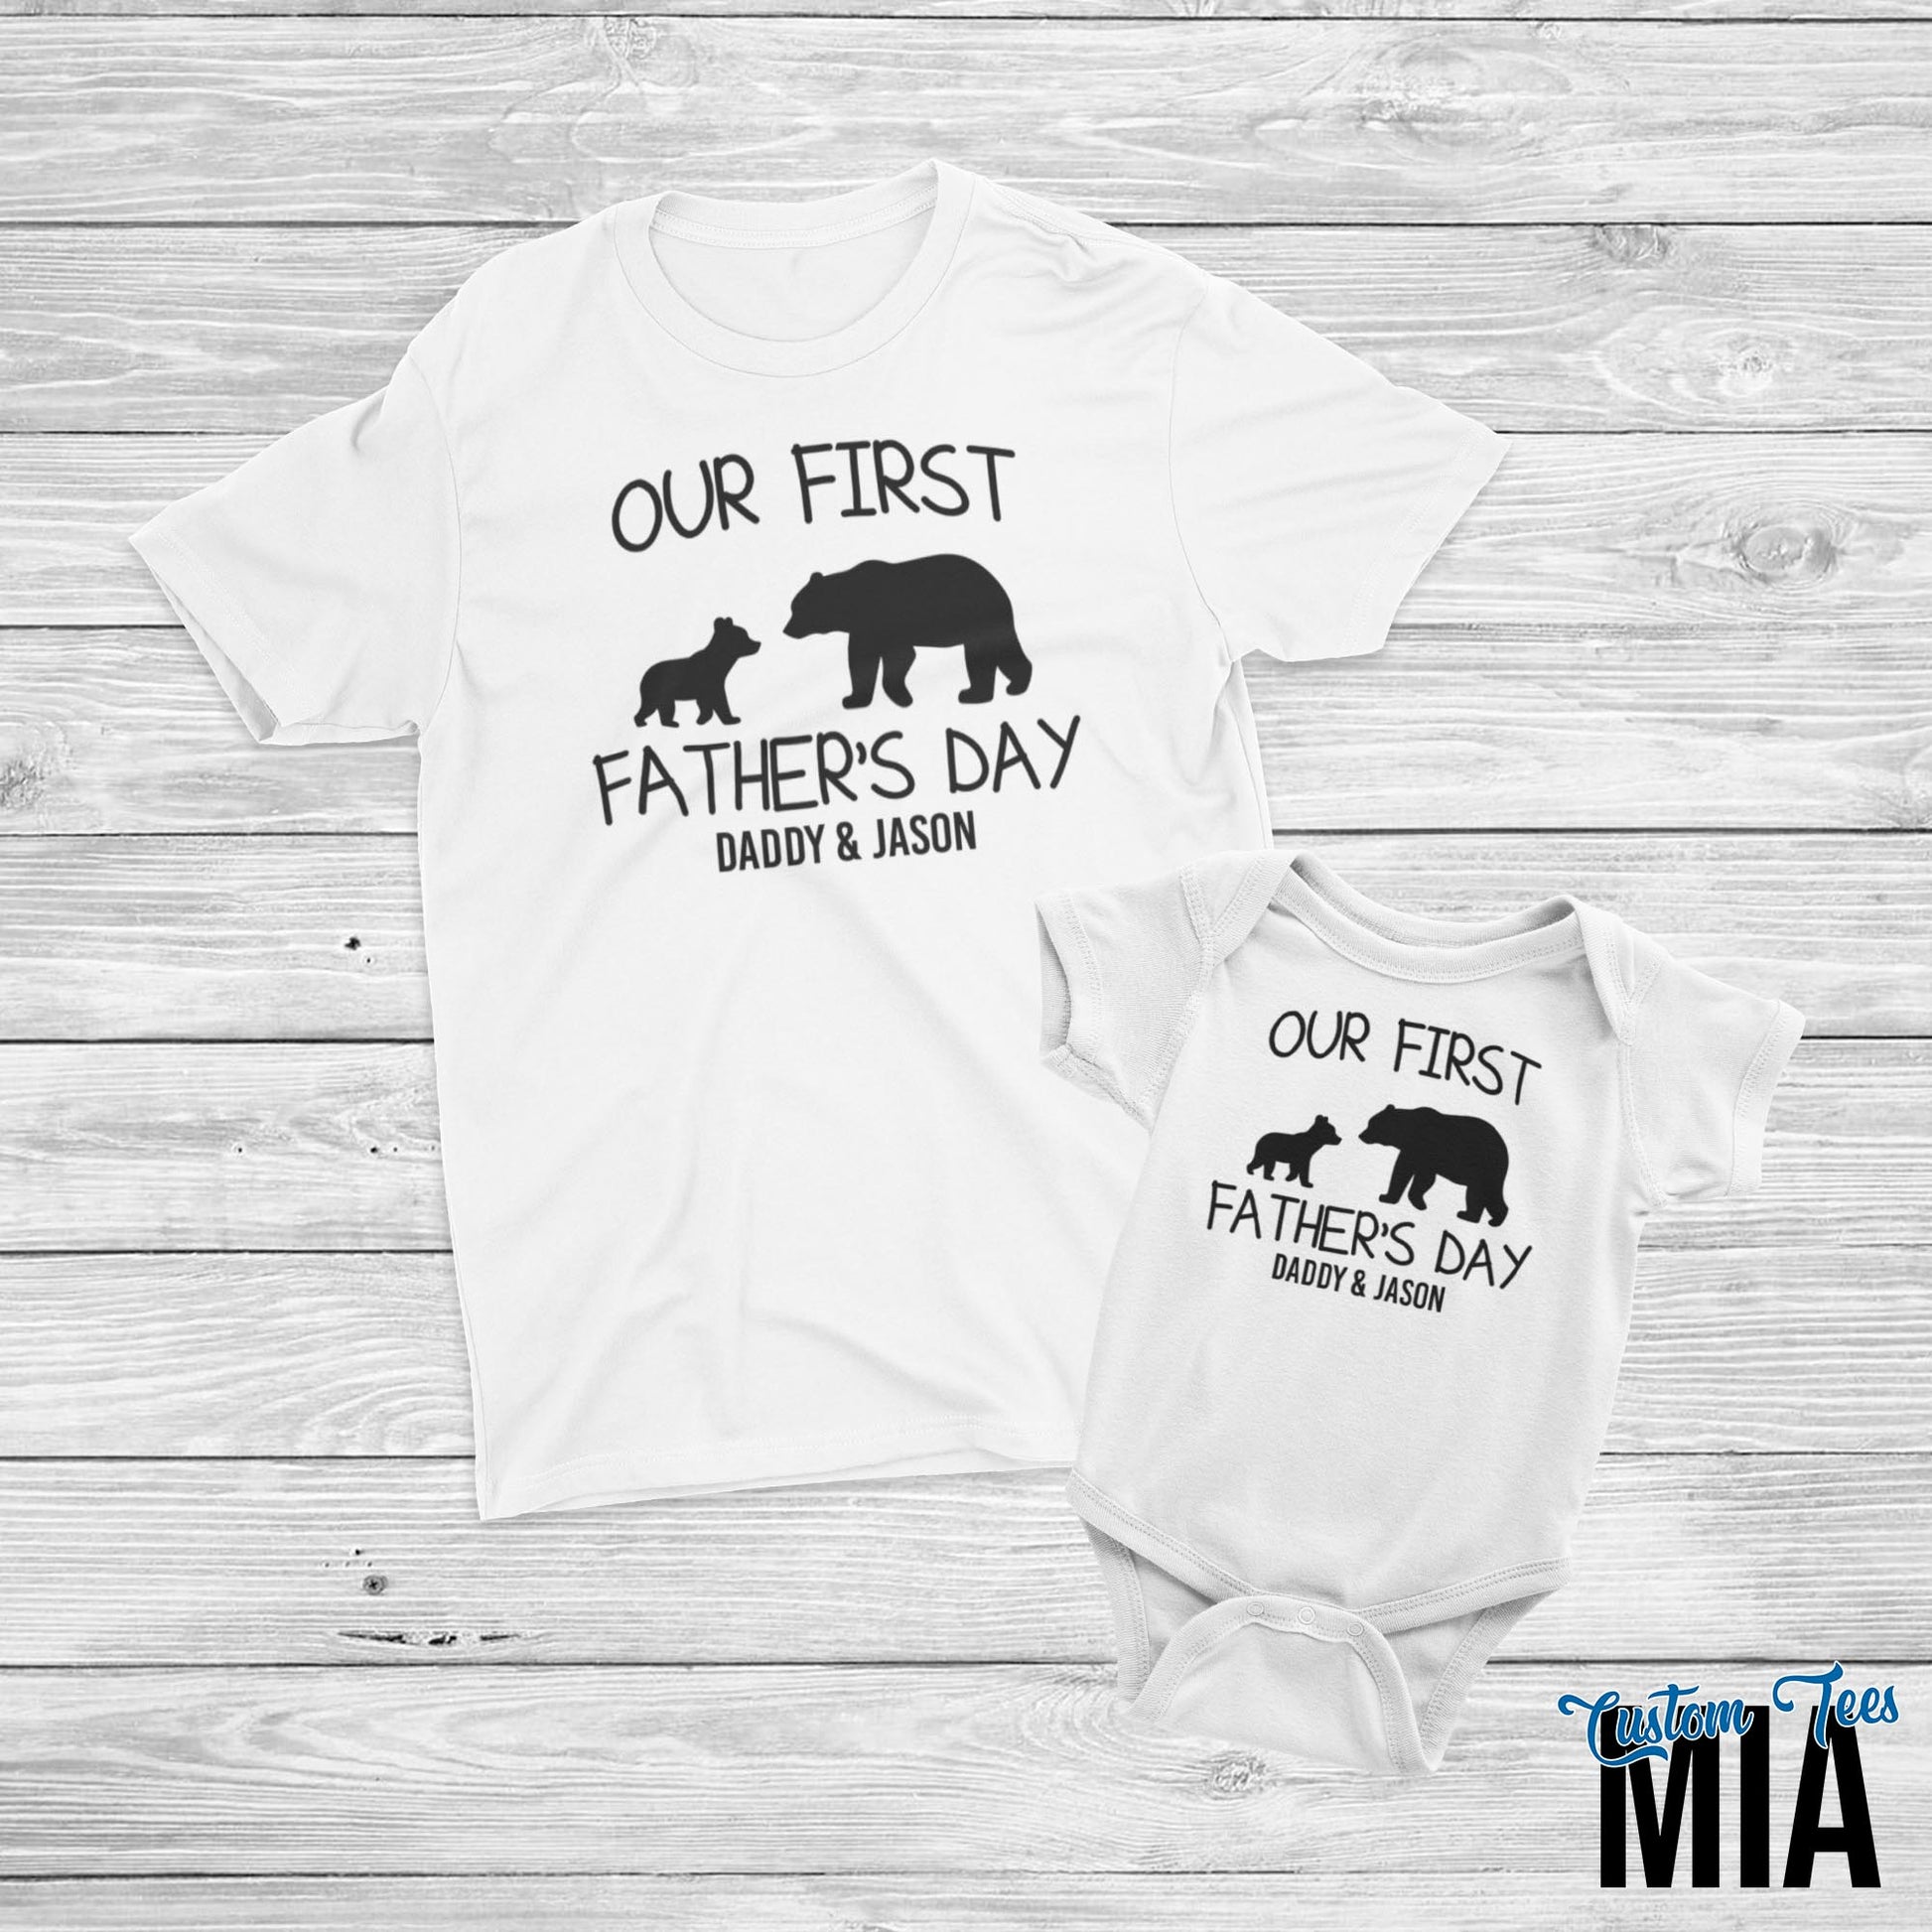 Our First Father's Day Personalized Matching Shirt & Onesie - Custom Tees MIA